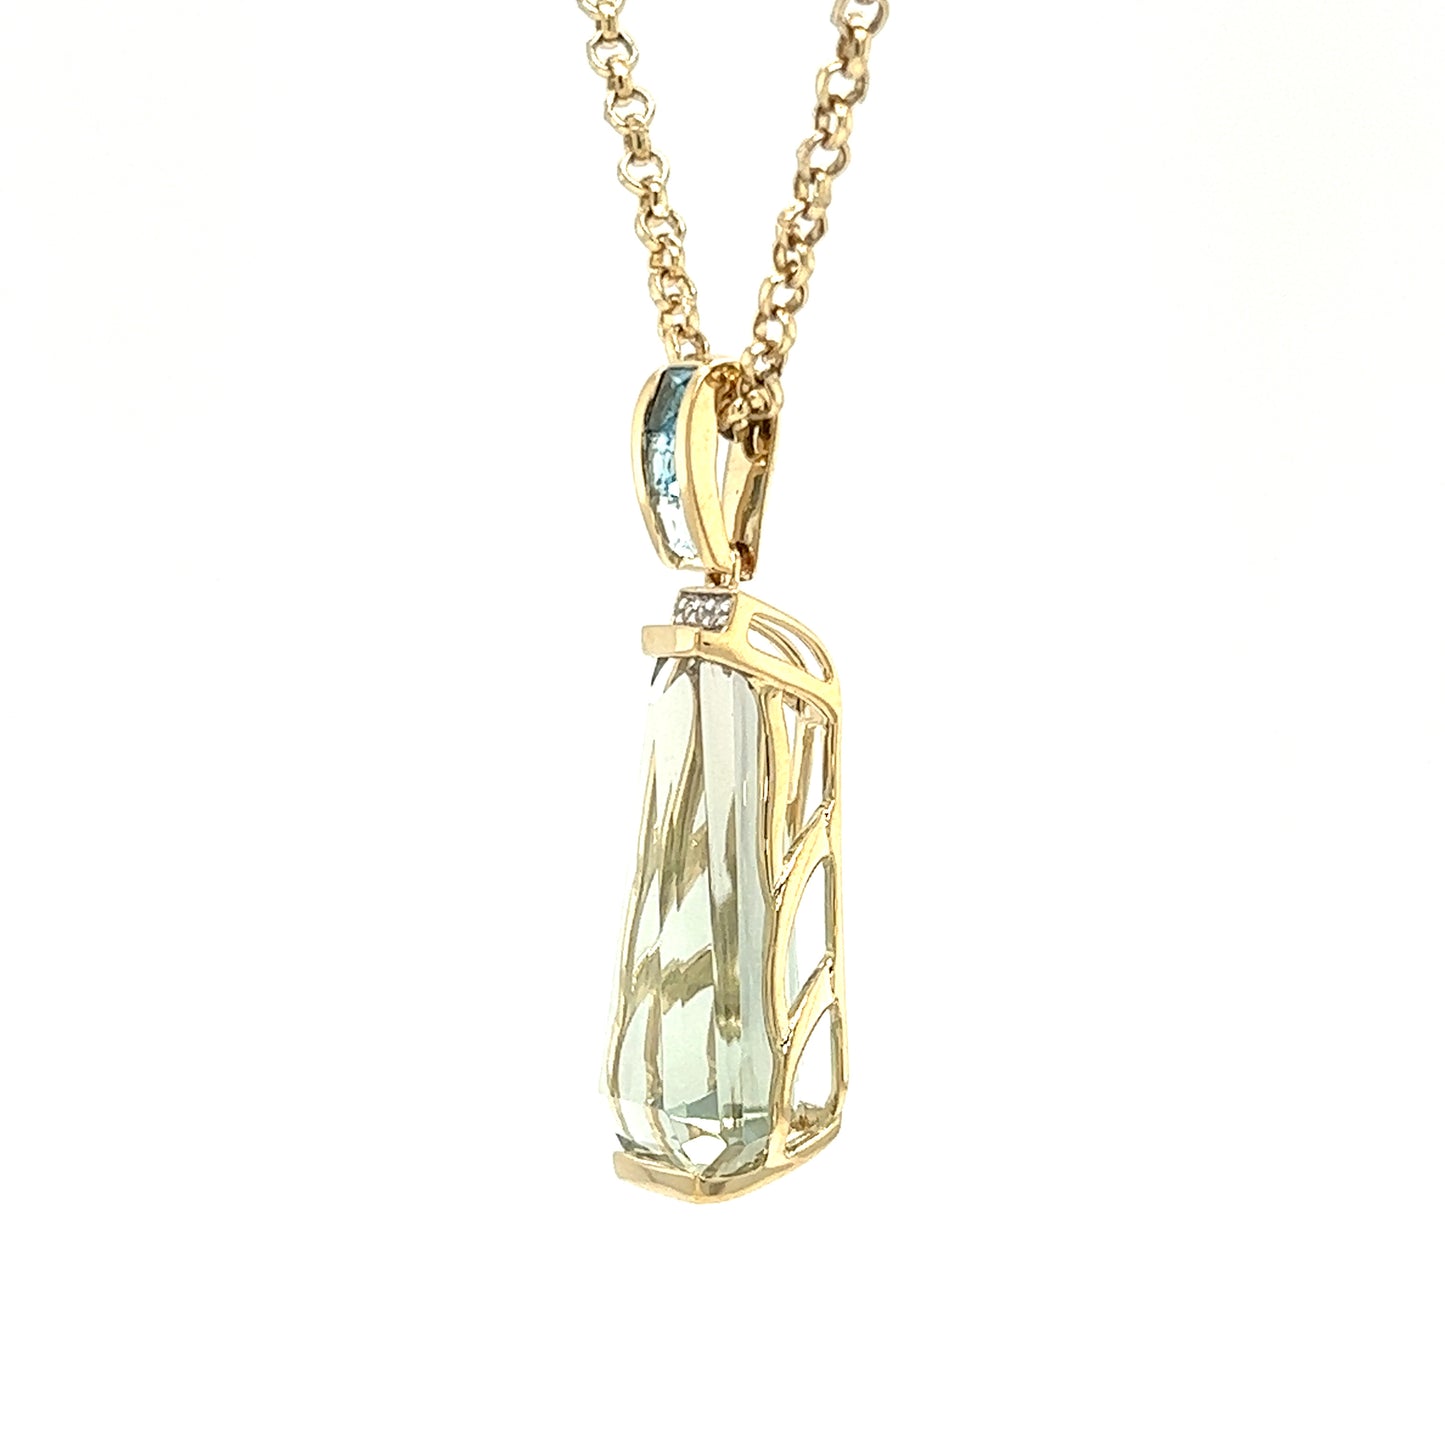 Green Amethyst Pendant with Blue Topaz and Diamonds in 14K Yellow Gold Right Profile View